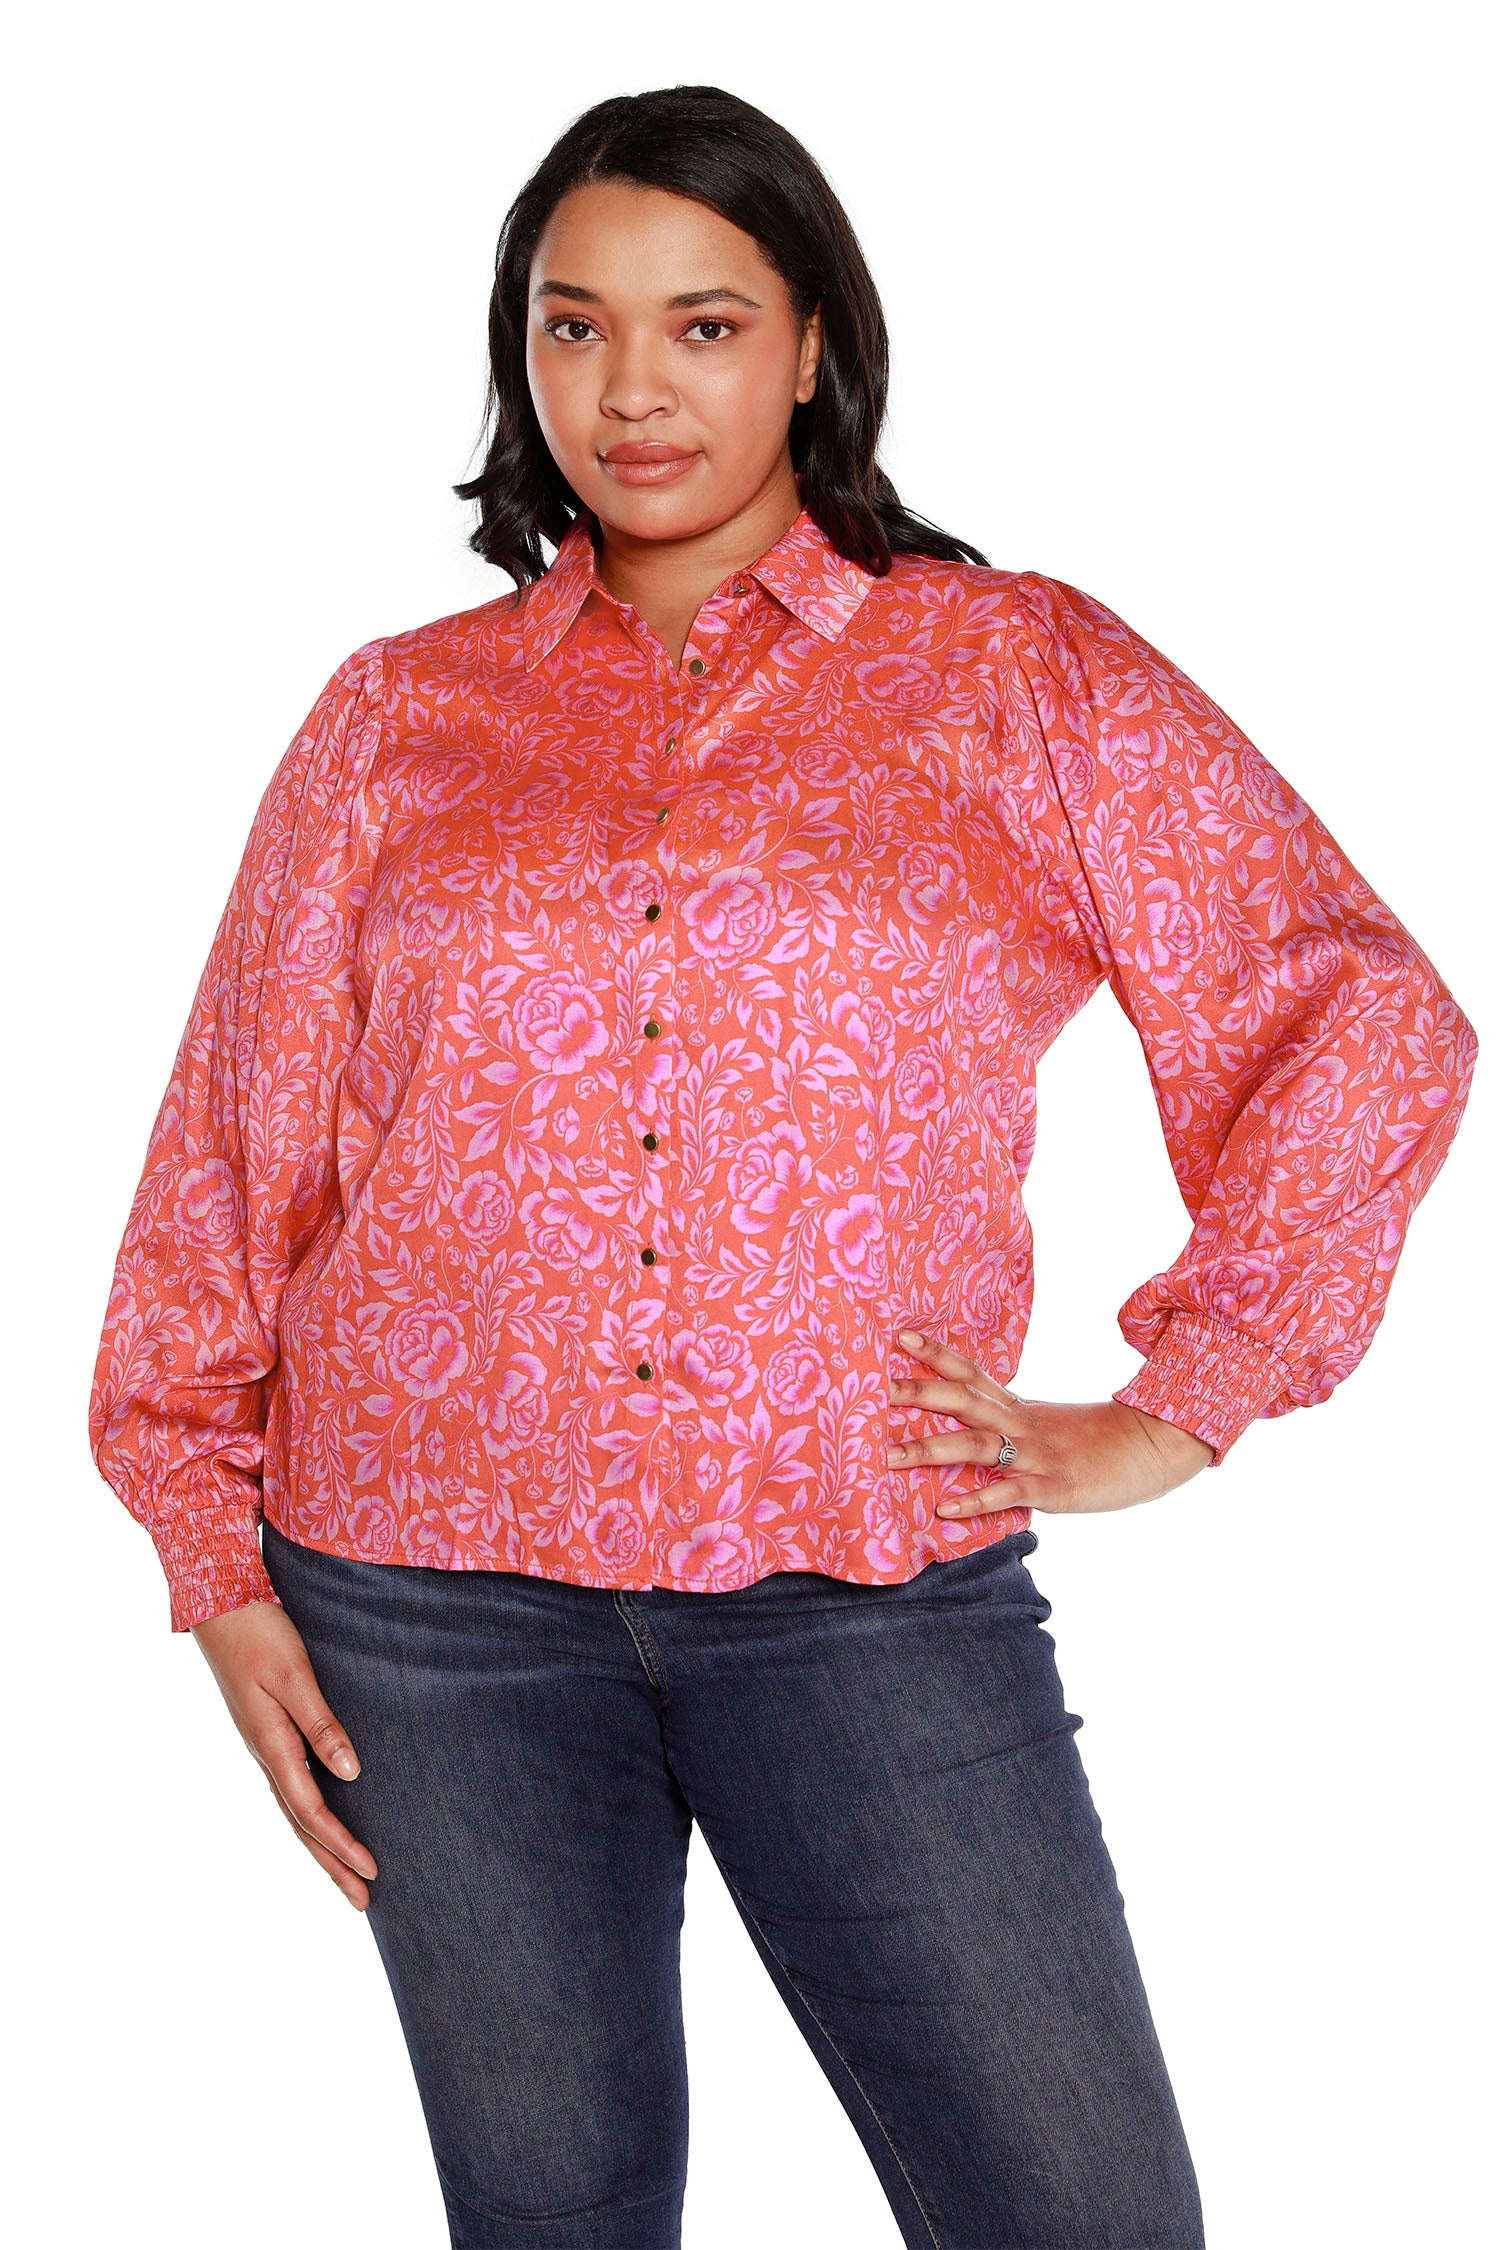 Women’s Floral Printed Button Front Shirt with Bishop Sleeves | Curvy